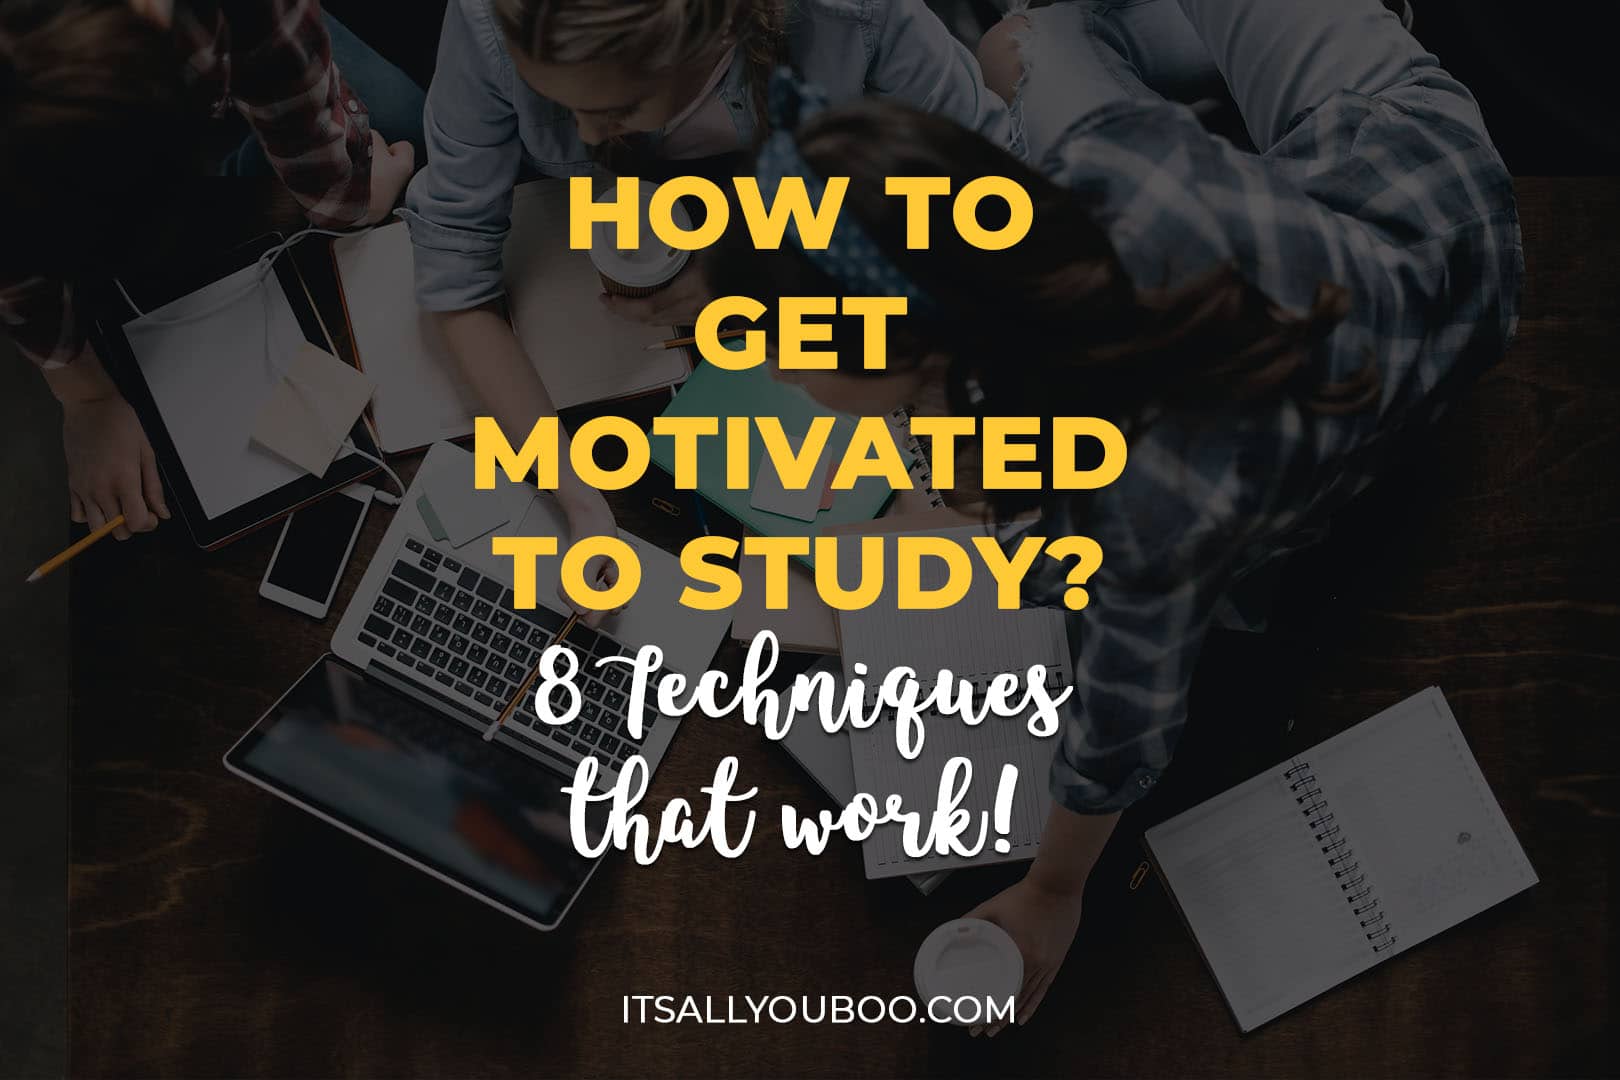 How to Get Motivated to Study? 8 Techniques that Work!